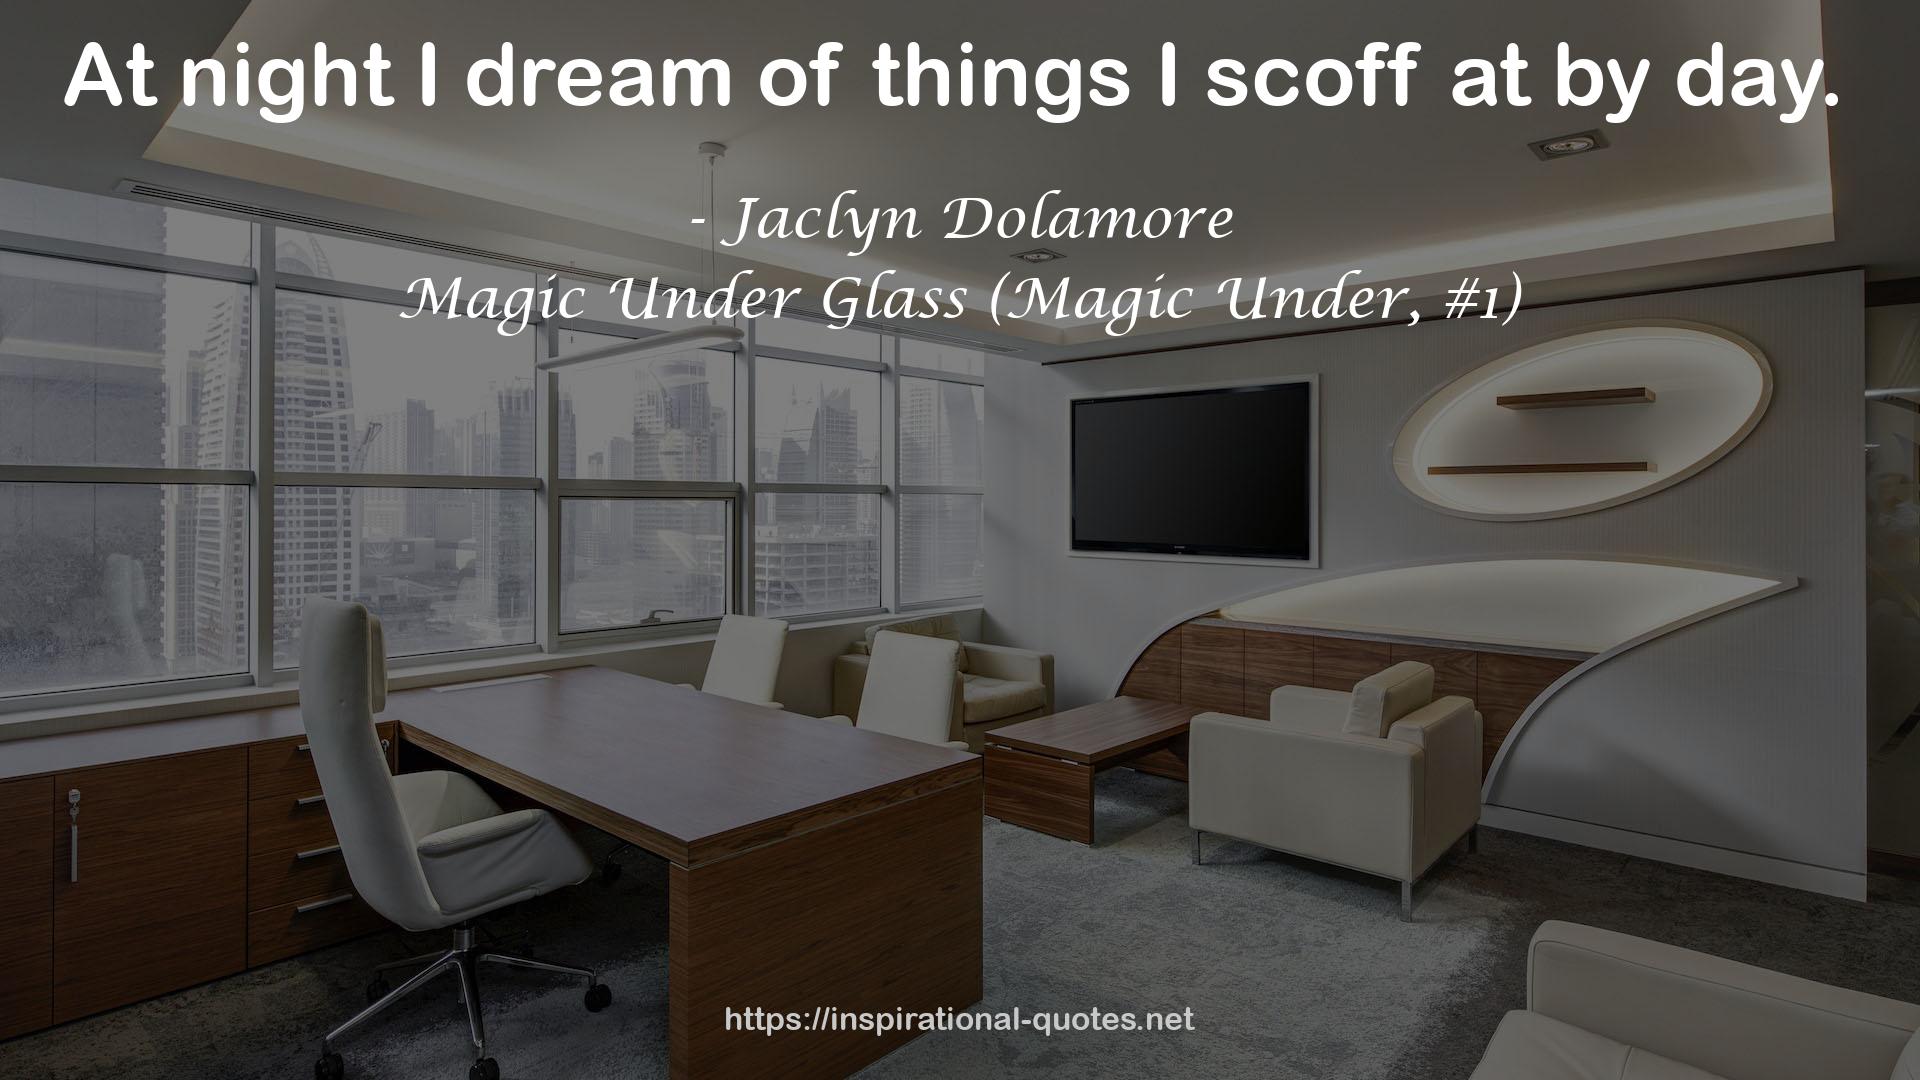 Jaclyn Dolamore QUOTES